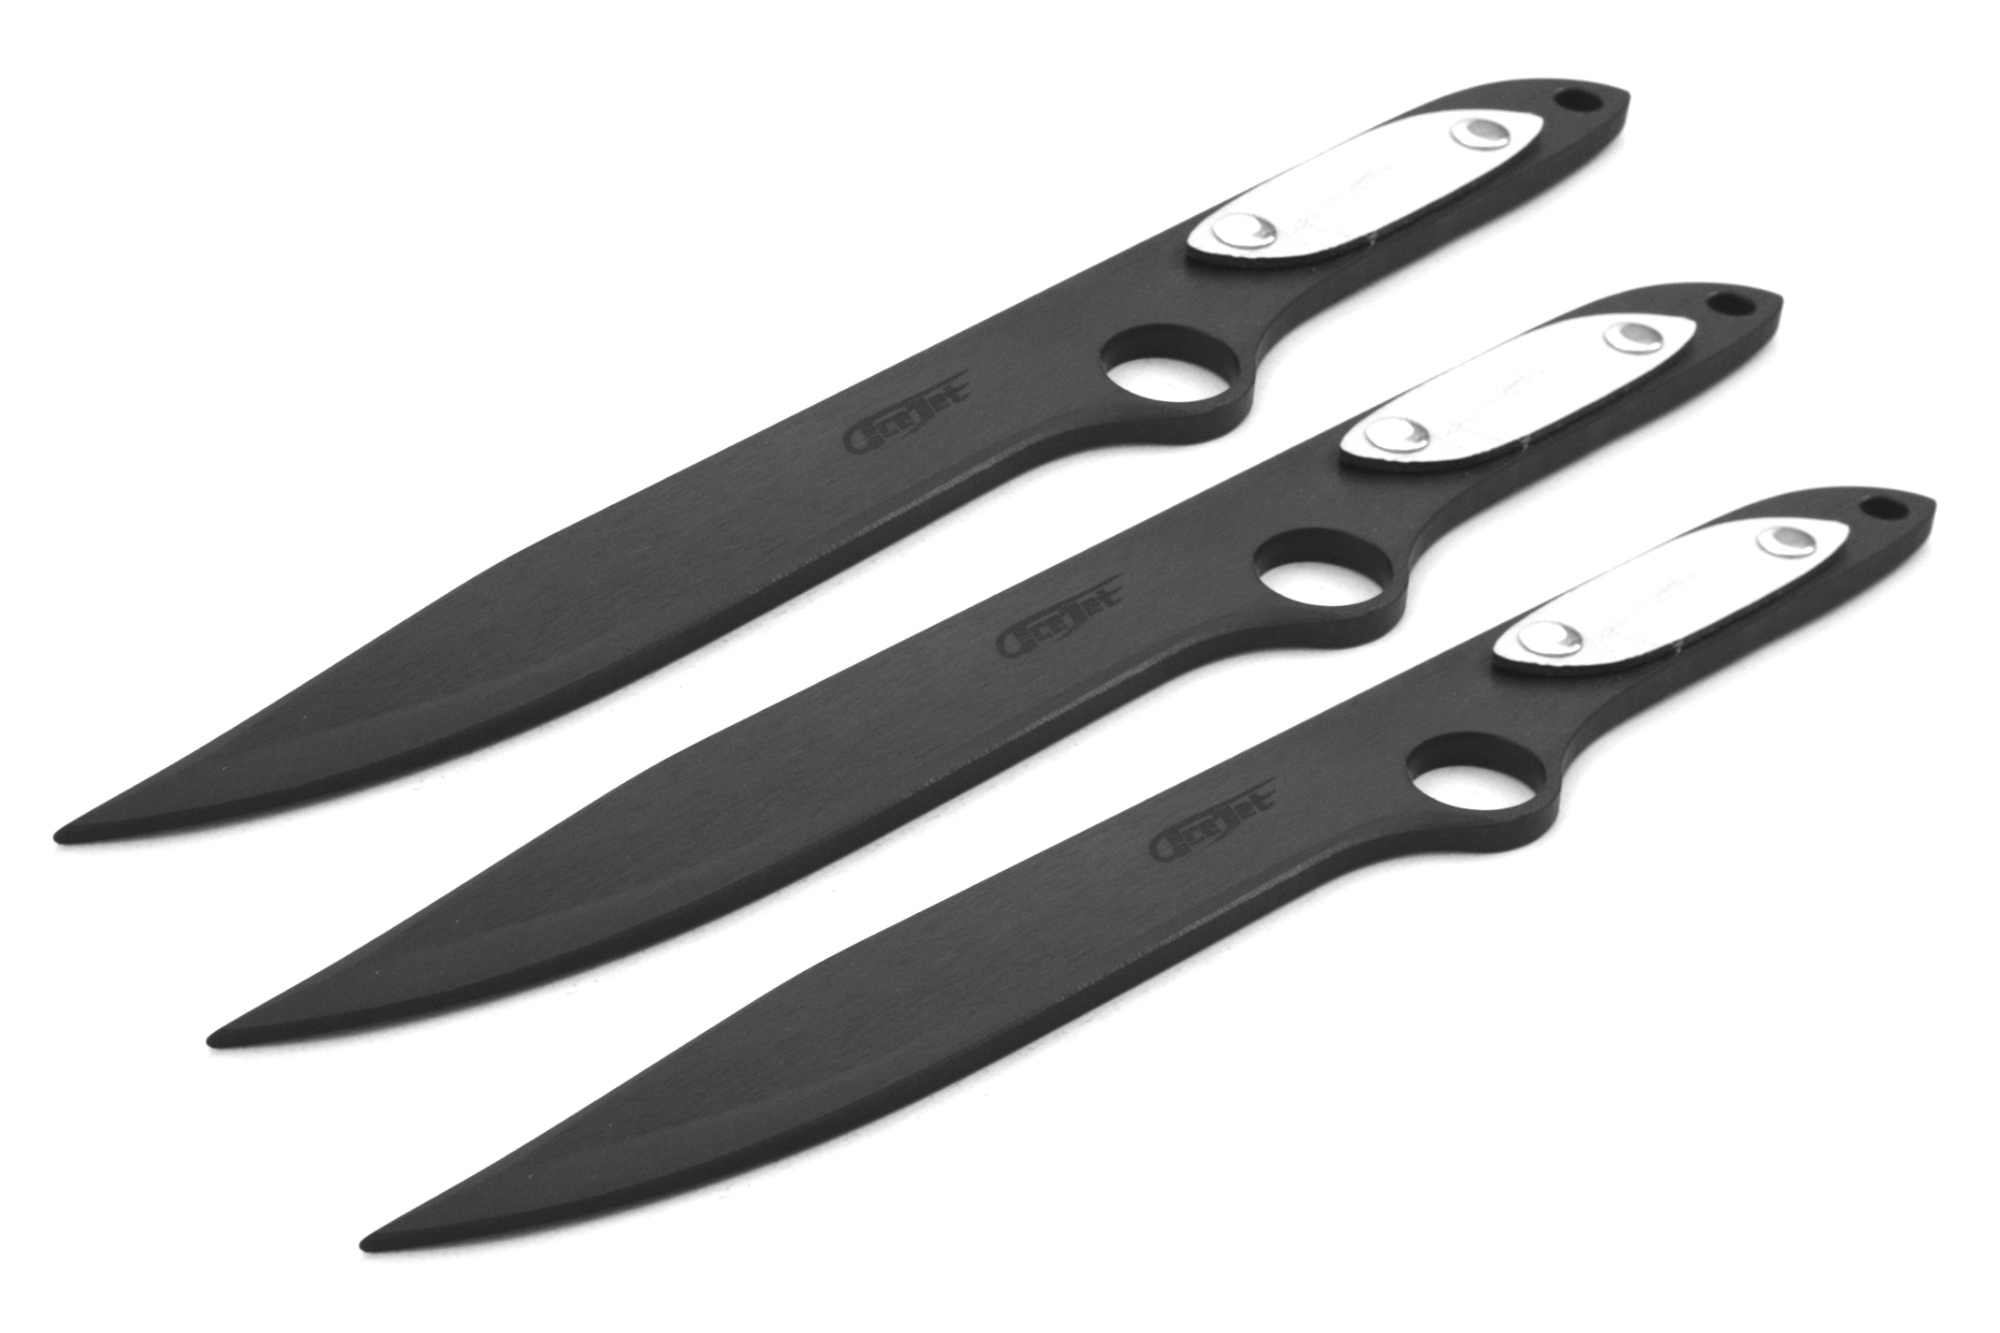 ACEJET SPINNER BOWIE Shadow Hunter 13'' white grip - throwing knife set of 3